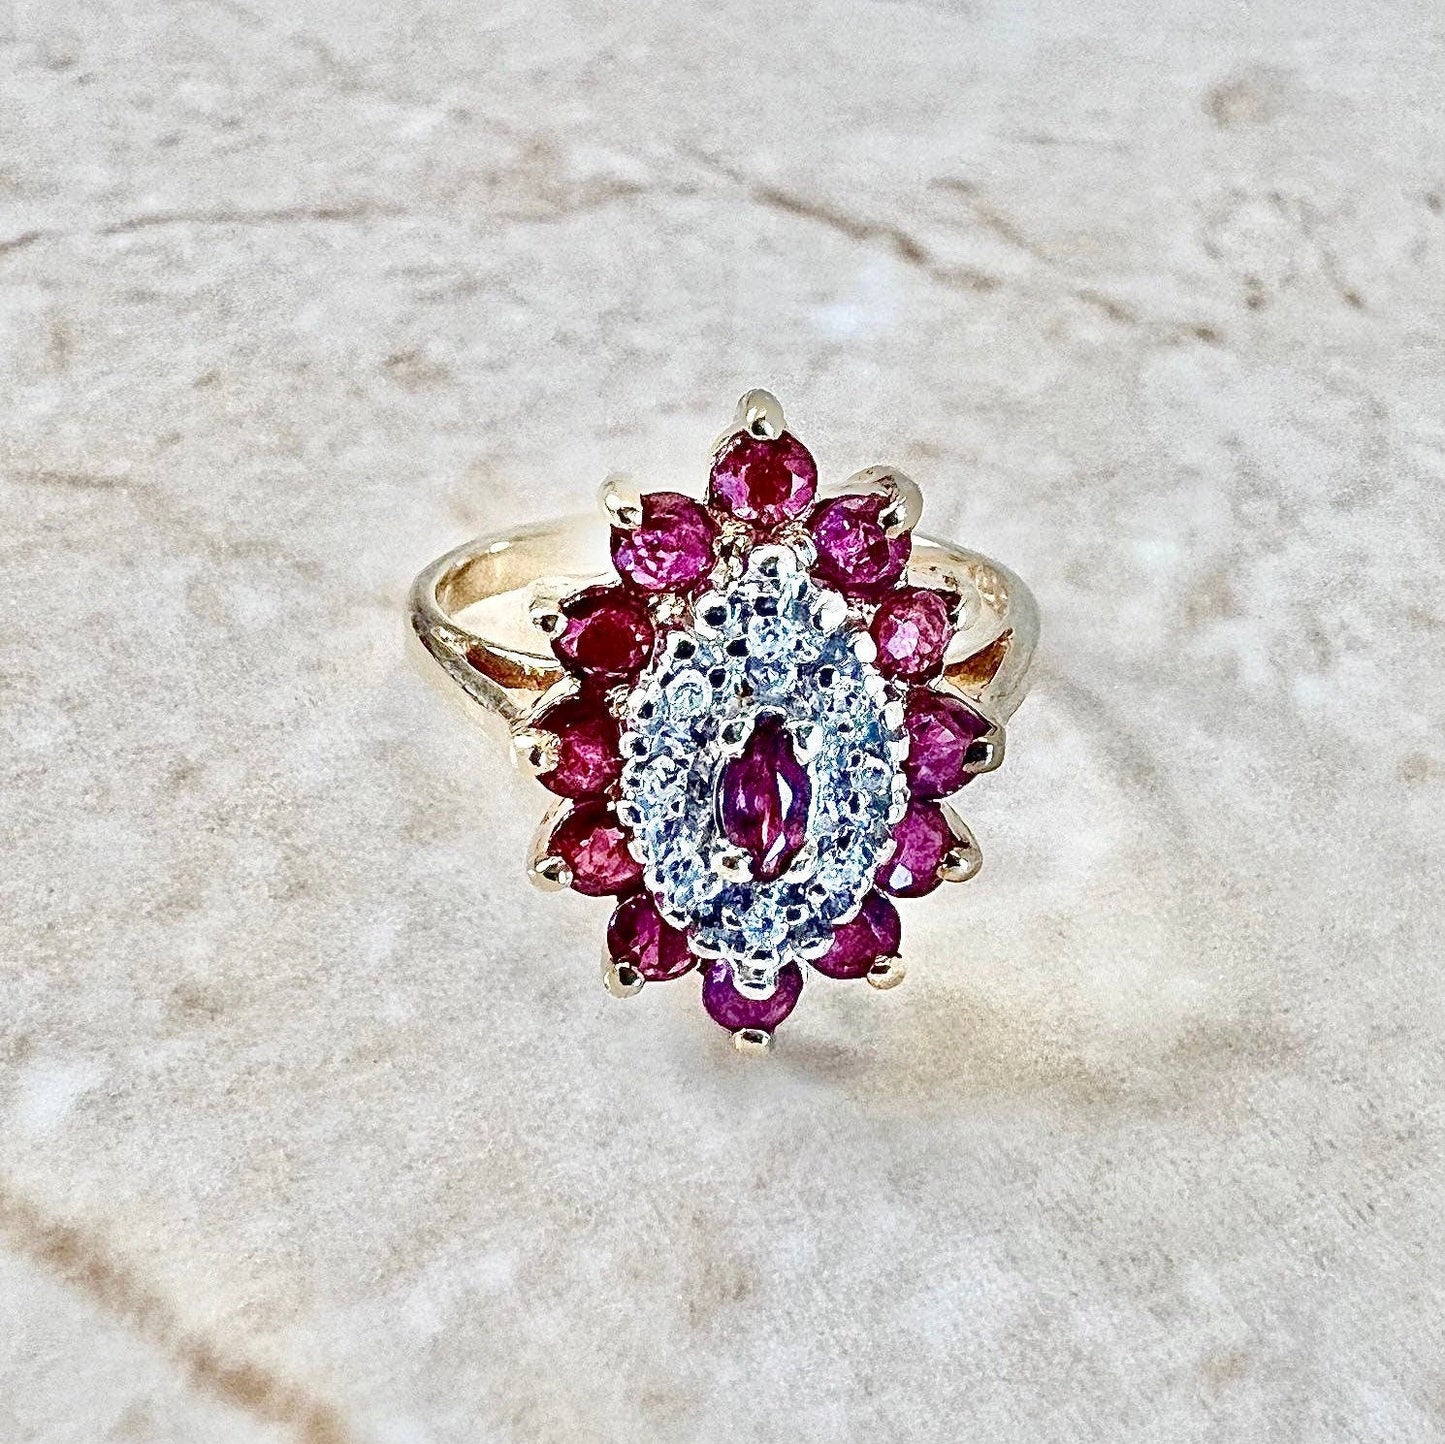 Vintage 10K Natural Ruby & Diamond Halo Ring - 2 Tone Gold Ruby Cocktail Ring - April July Birthstone - Birthday Gift For Her